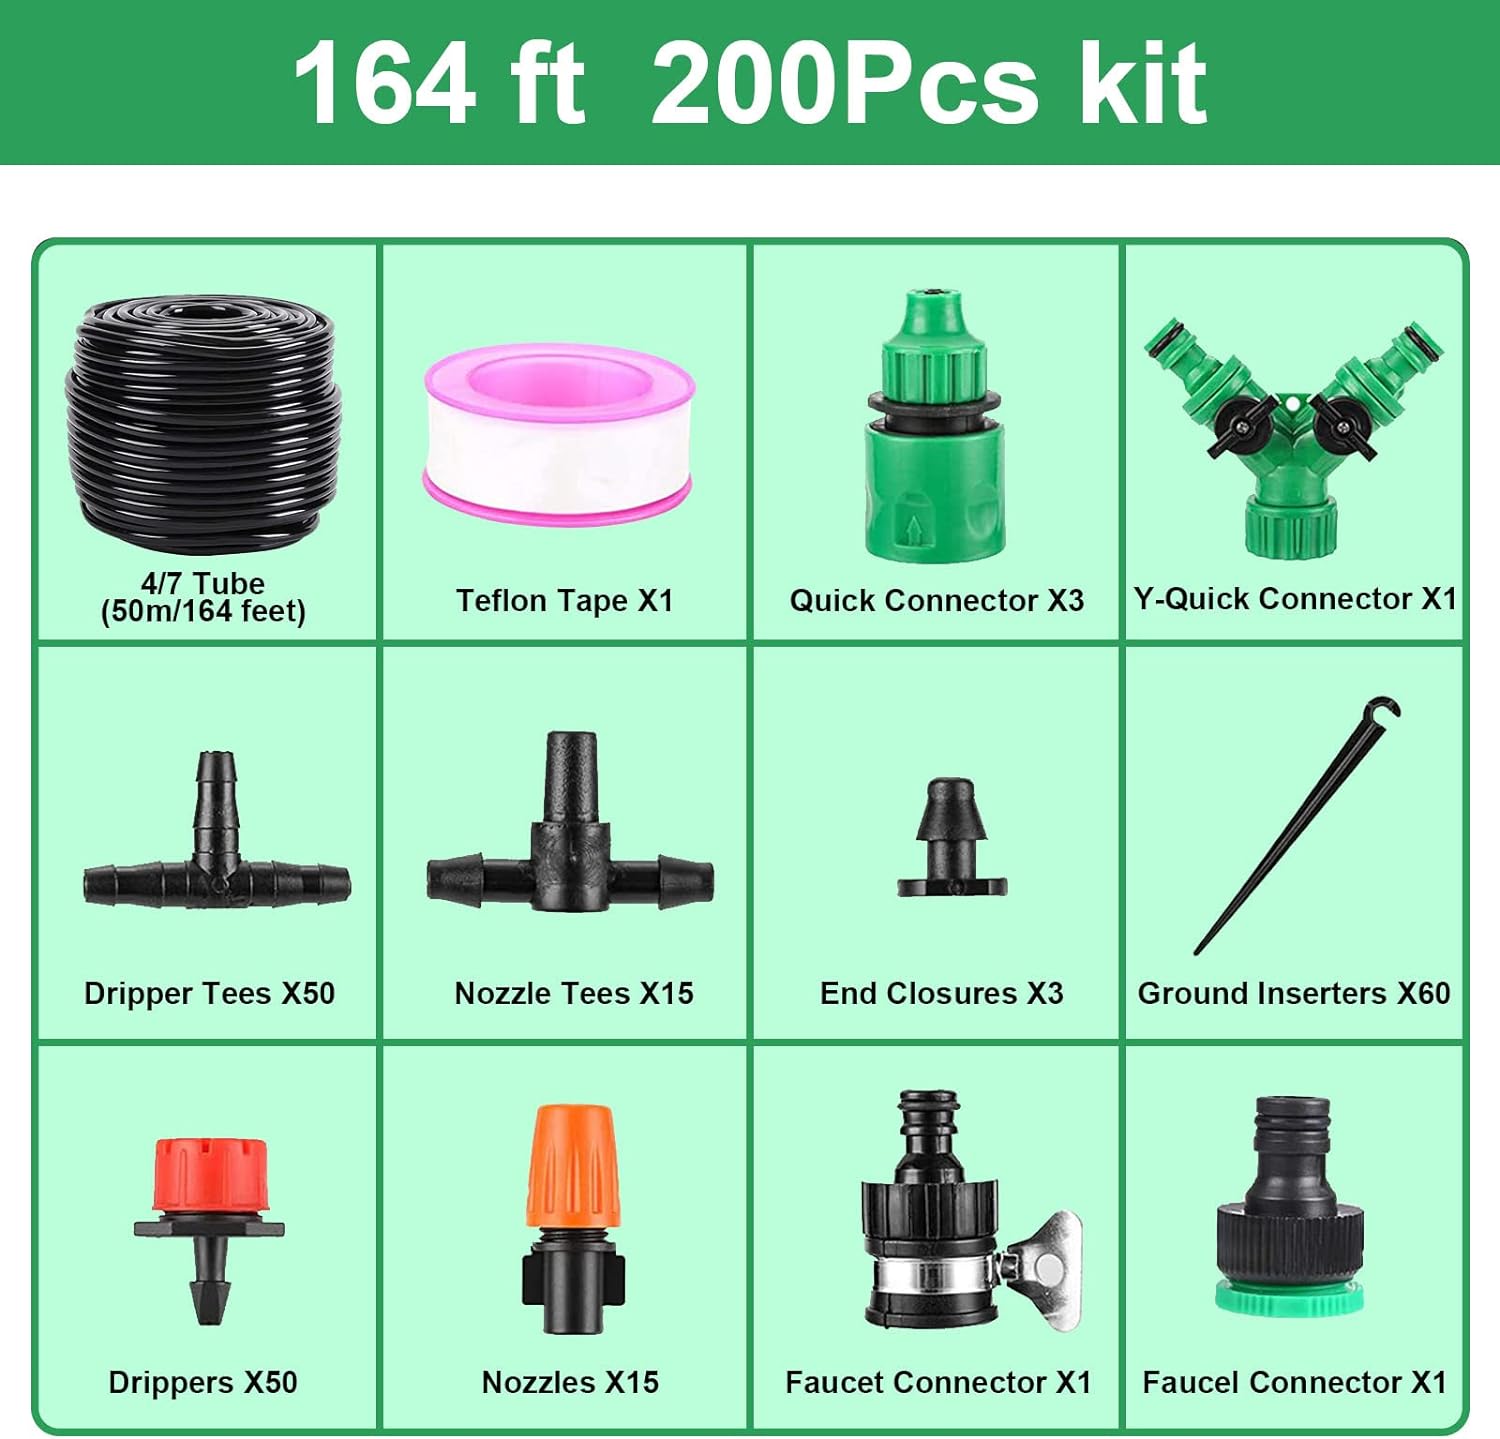 Amazon.com : Garden Drip Irrigation Kit,164FT/50M Greenhouse Micro automatic Drip Irrigation system Kit with 1/4 inch 1/2 inch Blank Distribution Tubing Hose Adjustable Patio Misting Nozzle Emitters Sprinkler Barbed Fittings : Patio, Lawn  Garden